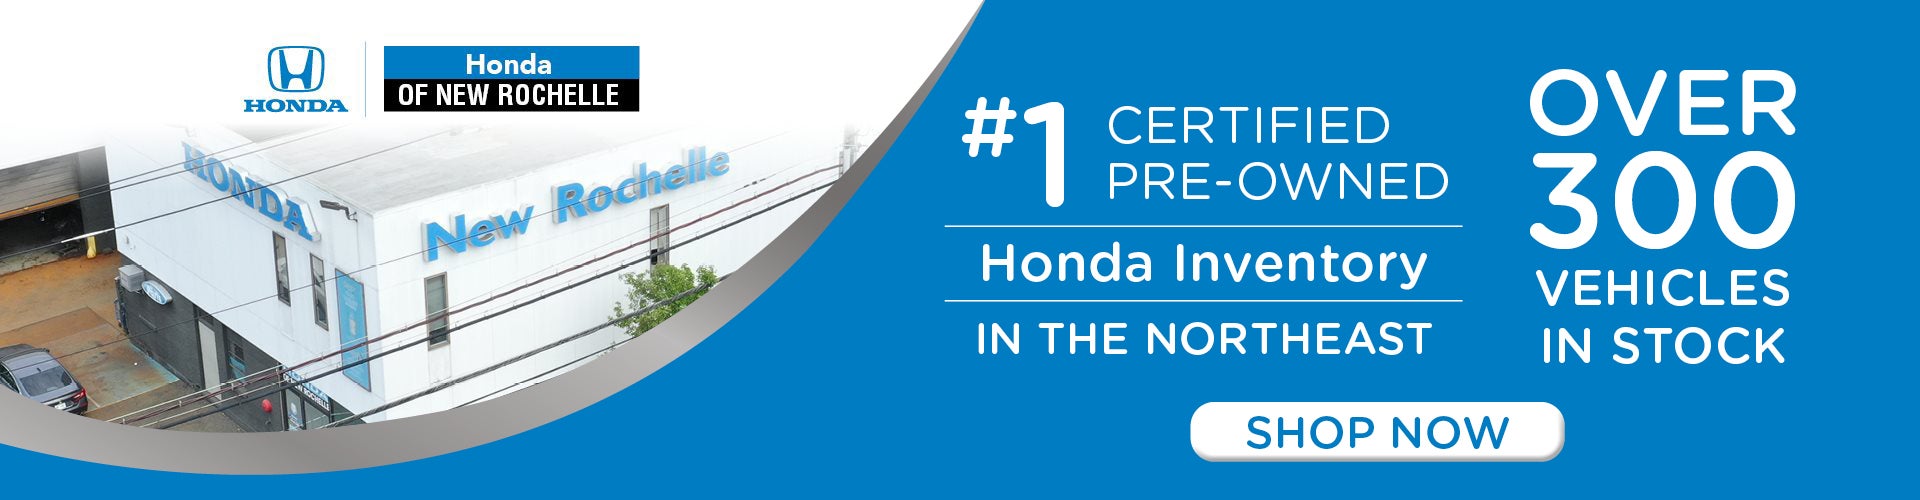 #1 Certified Pre-Owned Honda Inventory